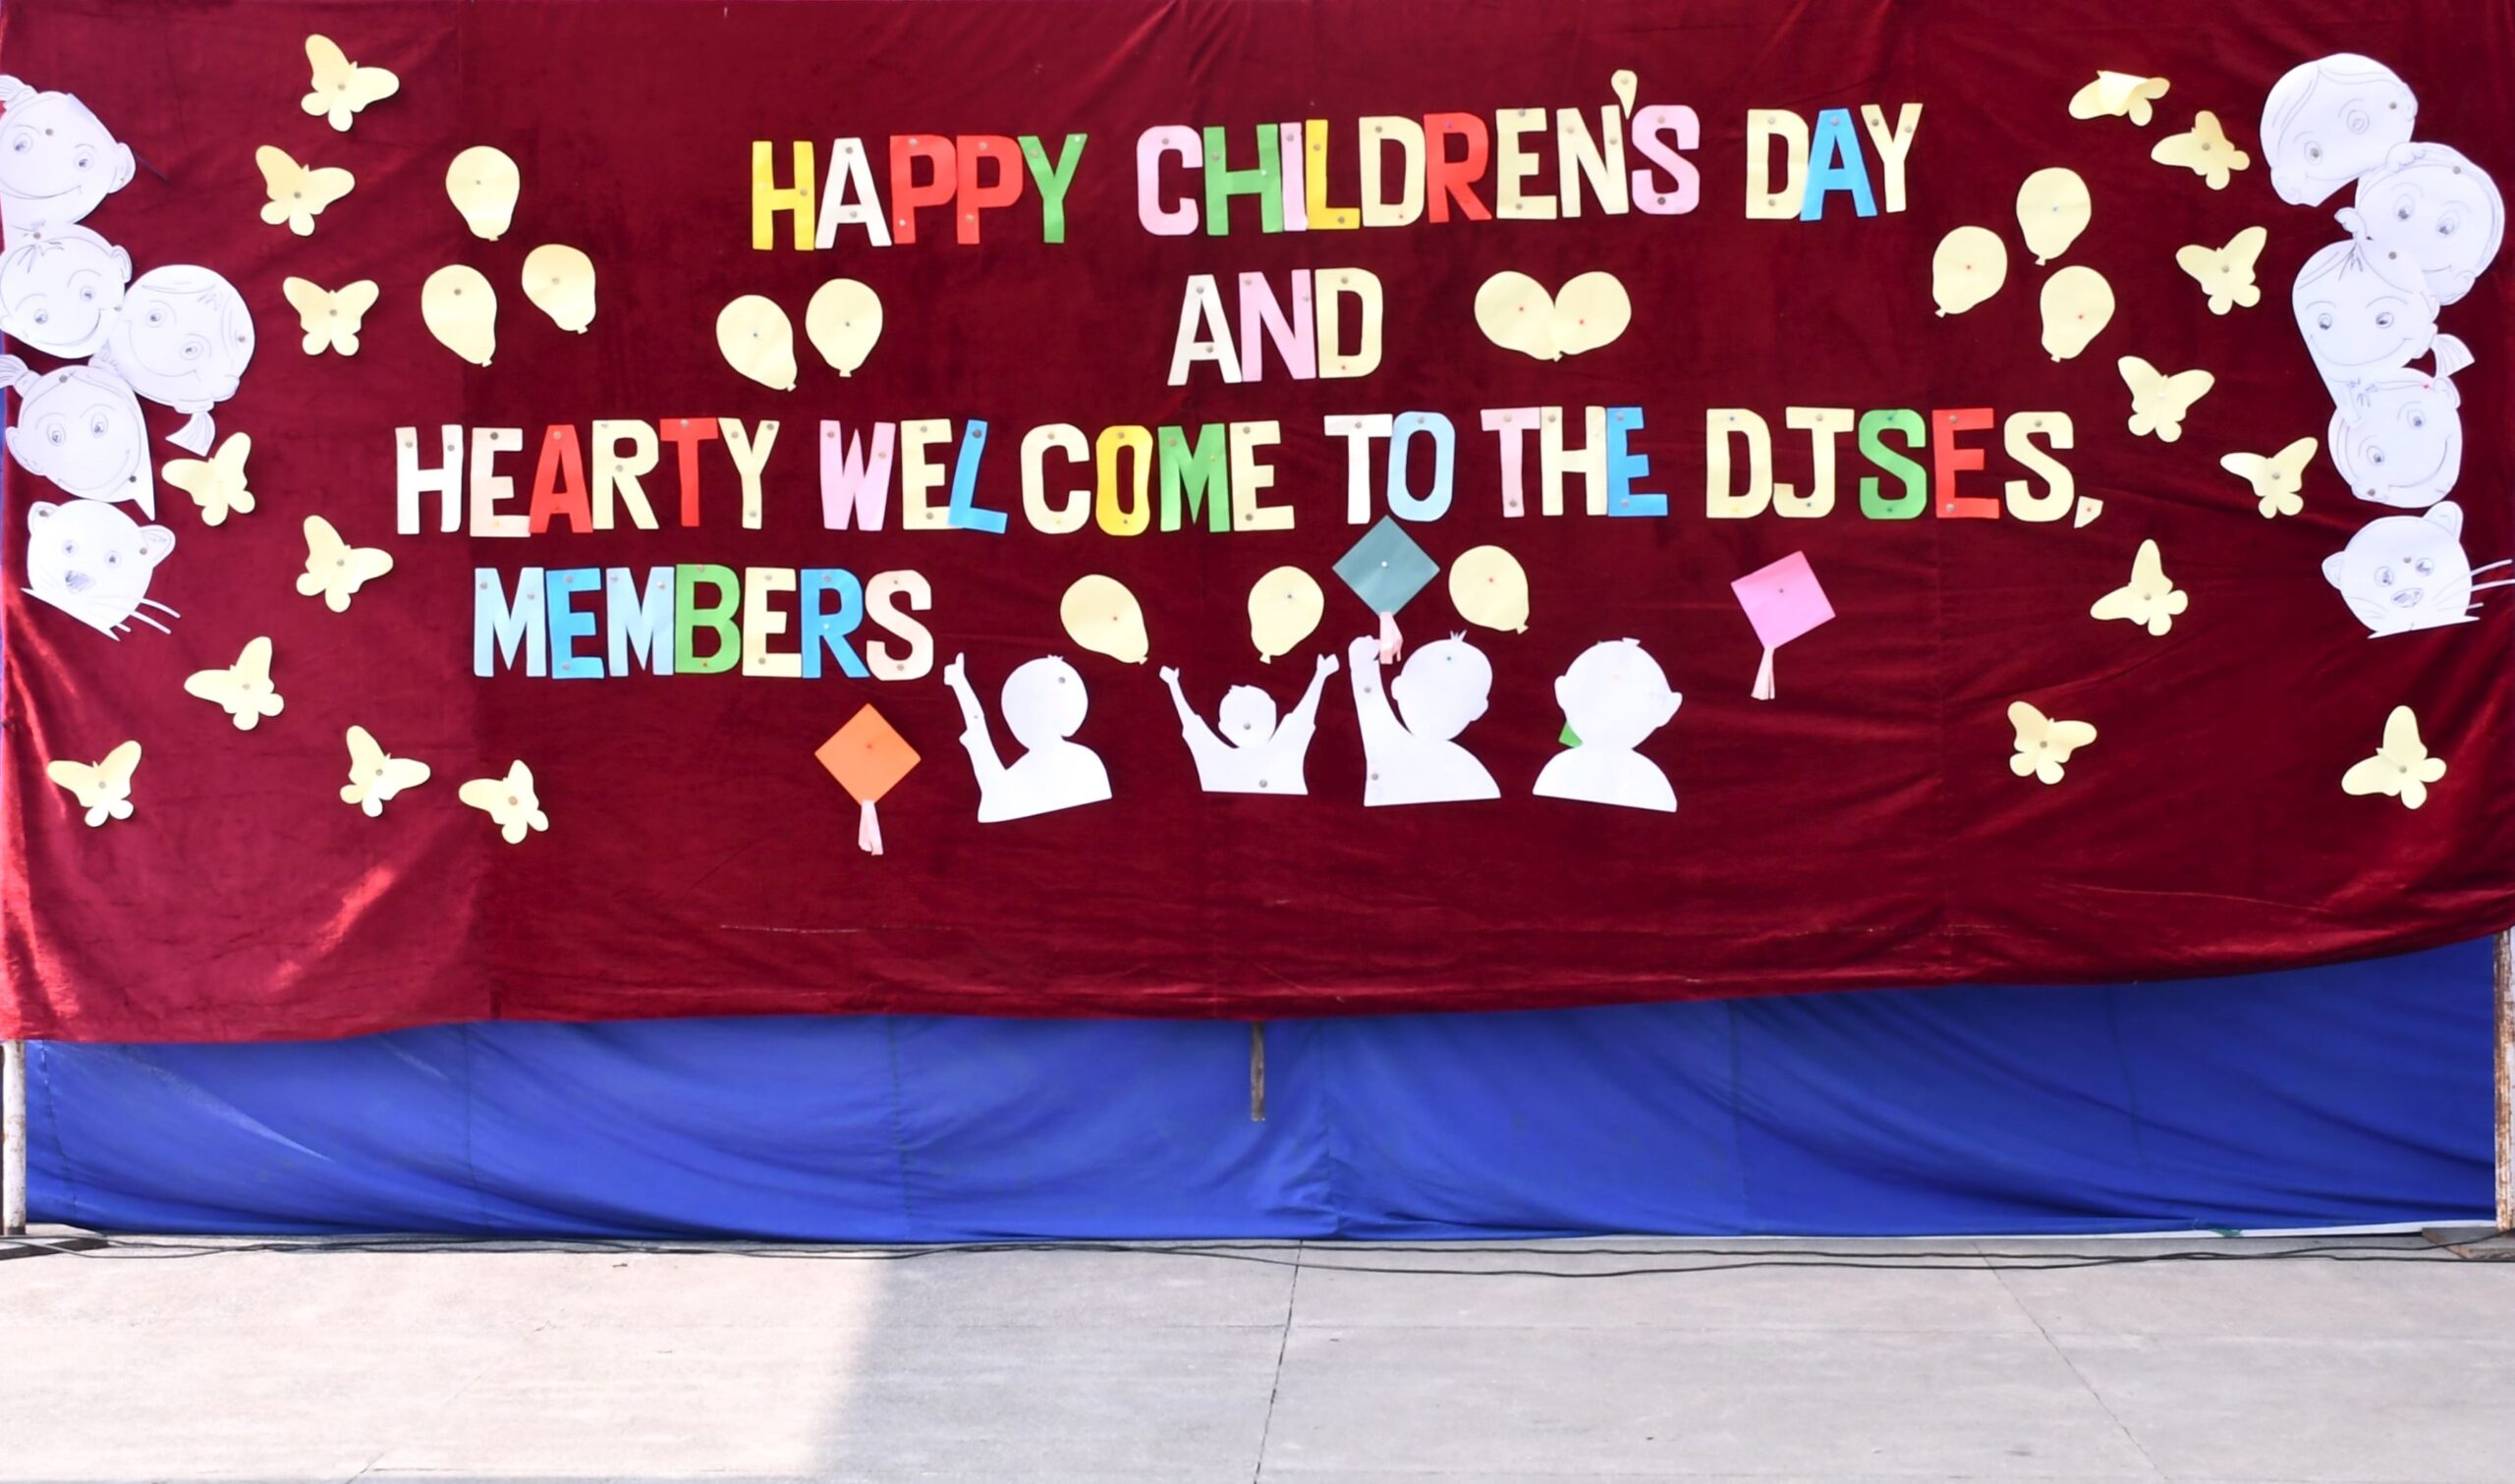 HAPPY CHILDREN’S DAY & HEARTY WELCOME TO THE DJSES,MEMBERS